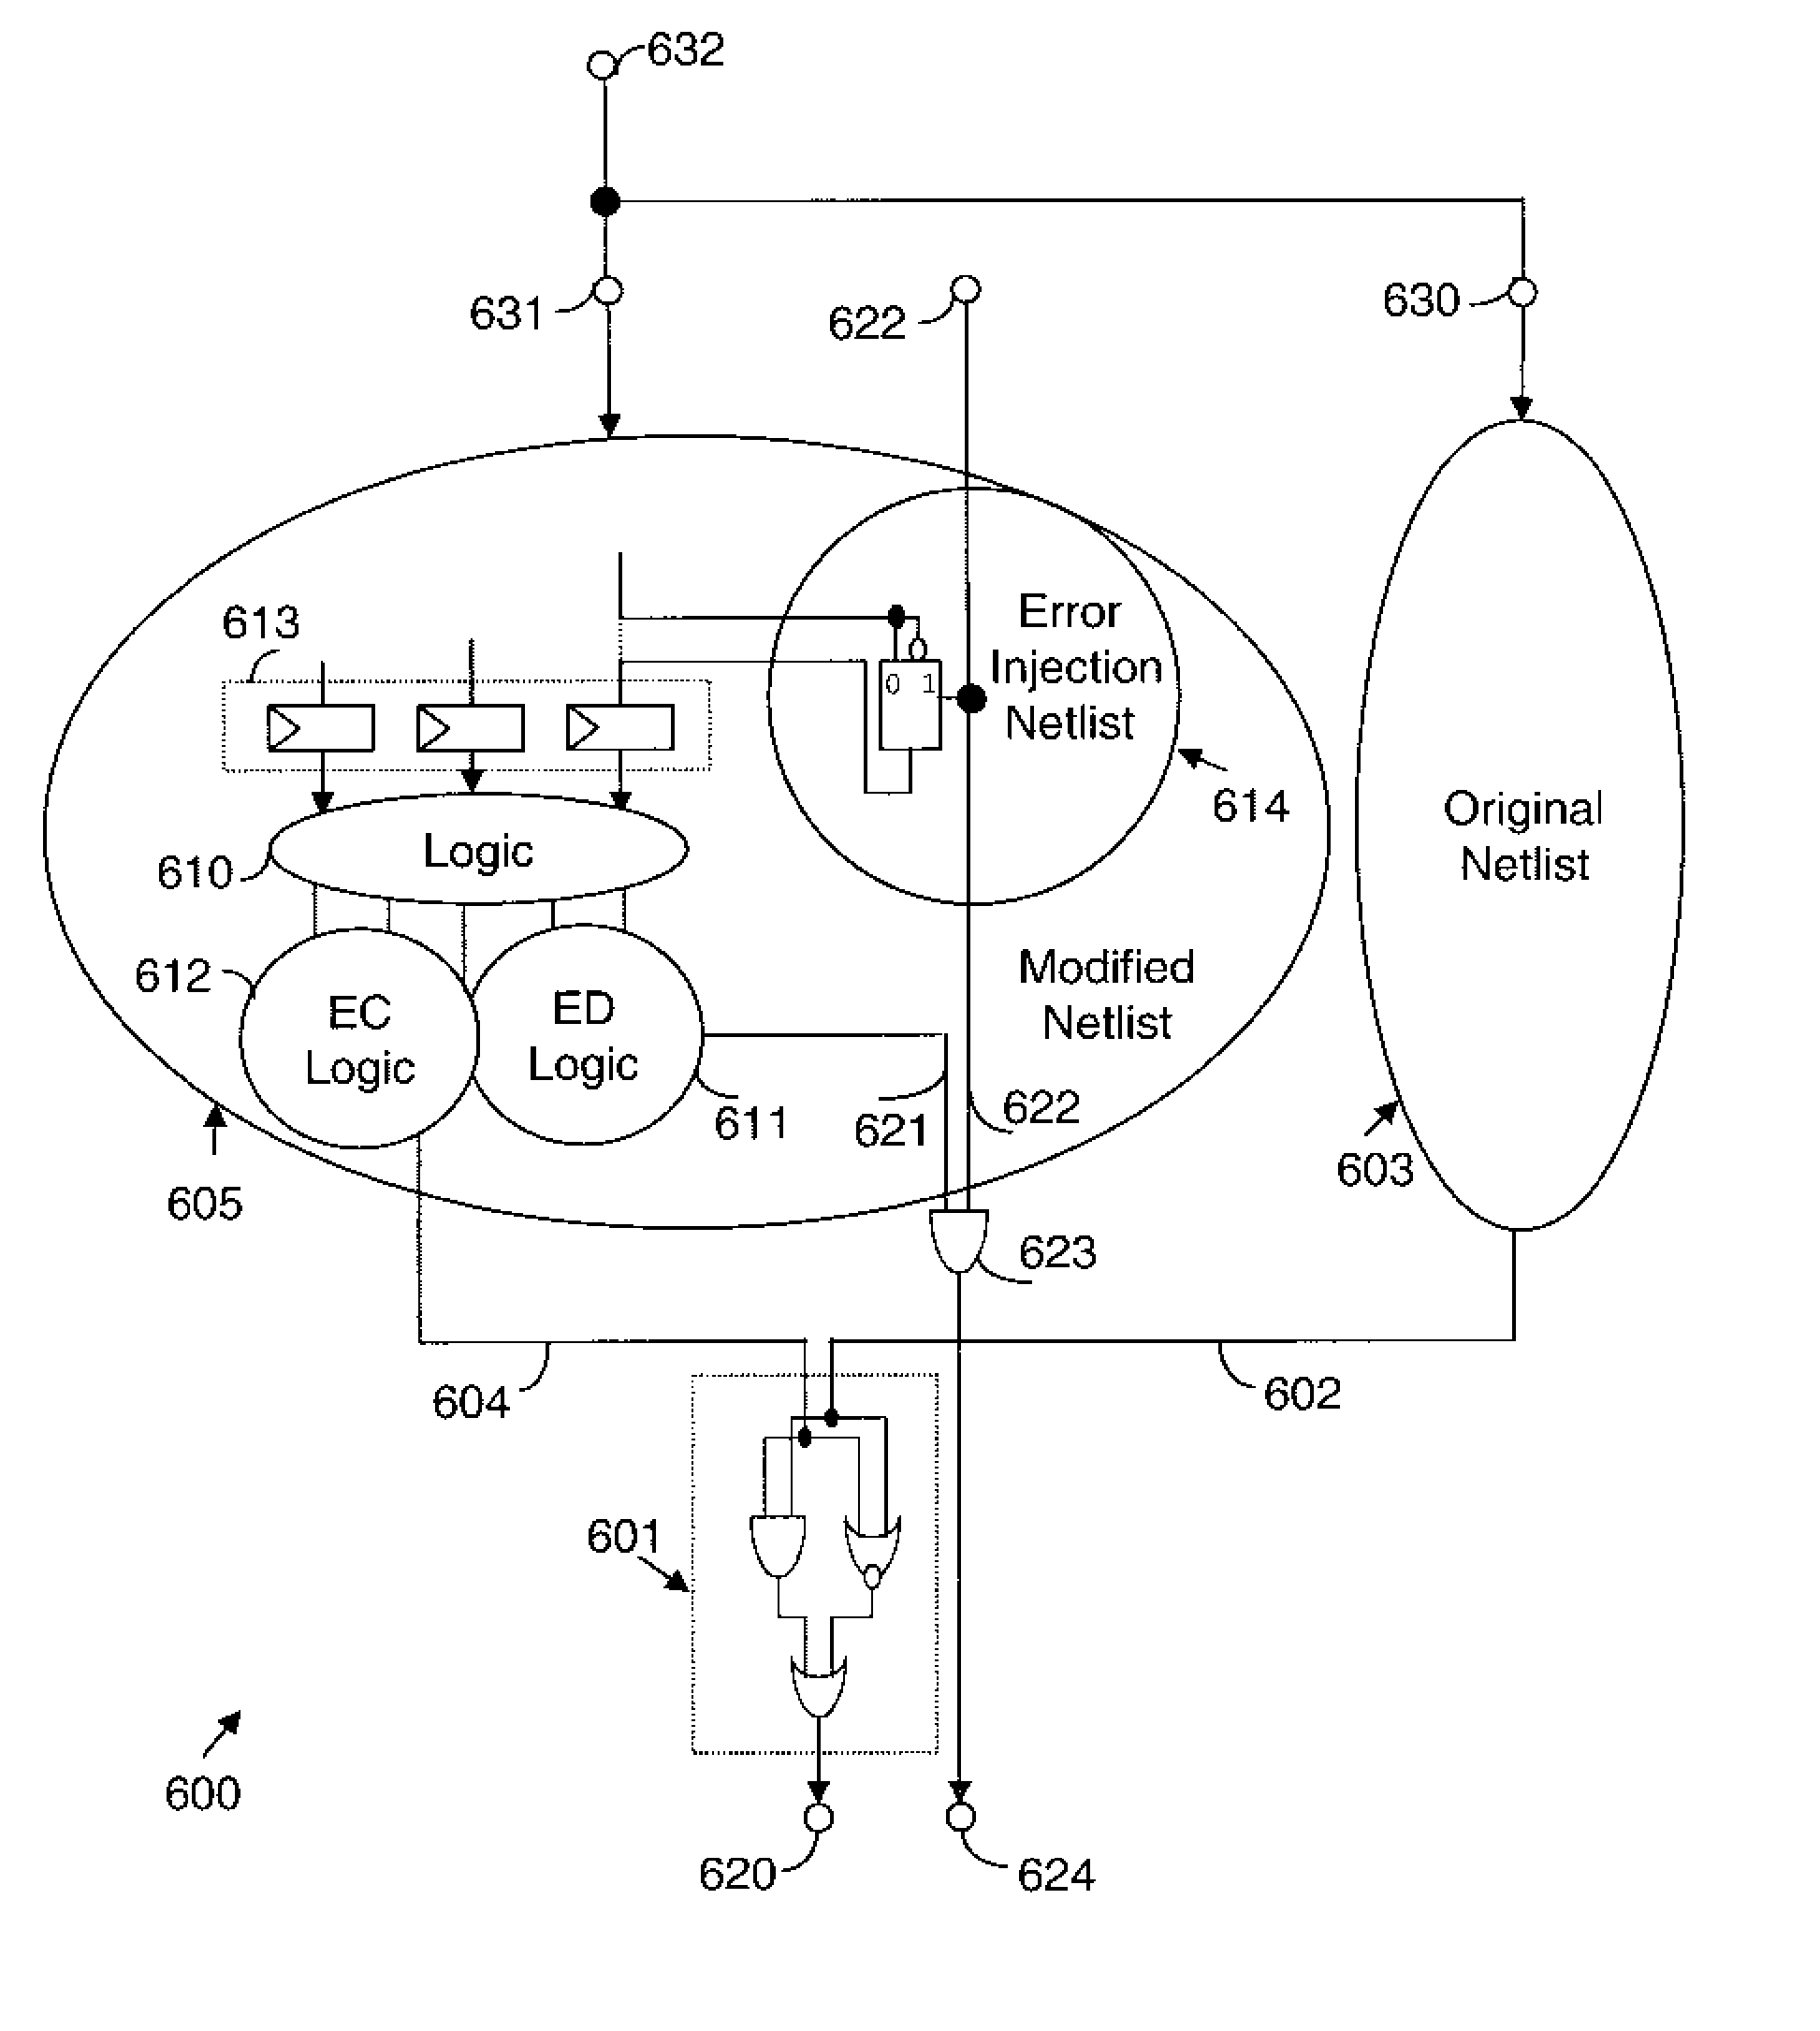 Method and System for Performing Functional Formal Verification of Logic Circuits